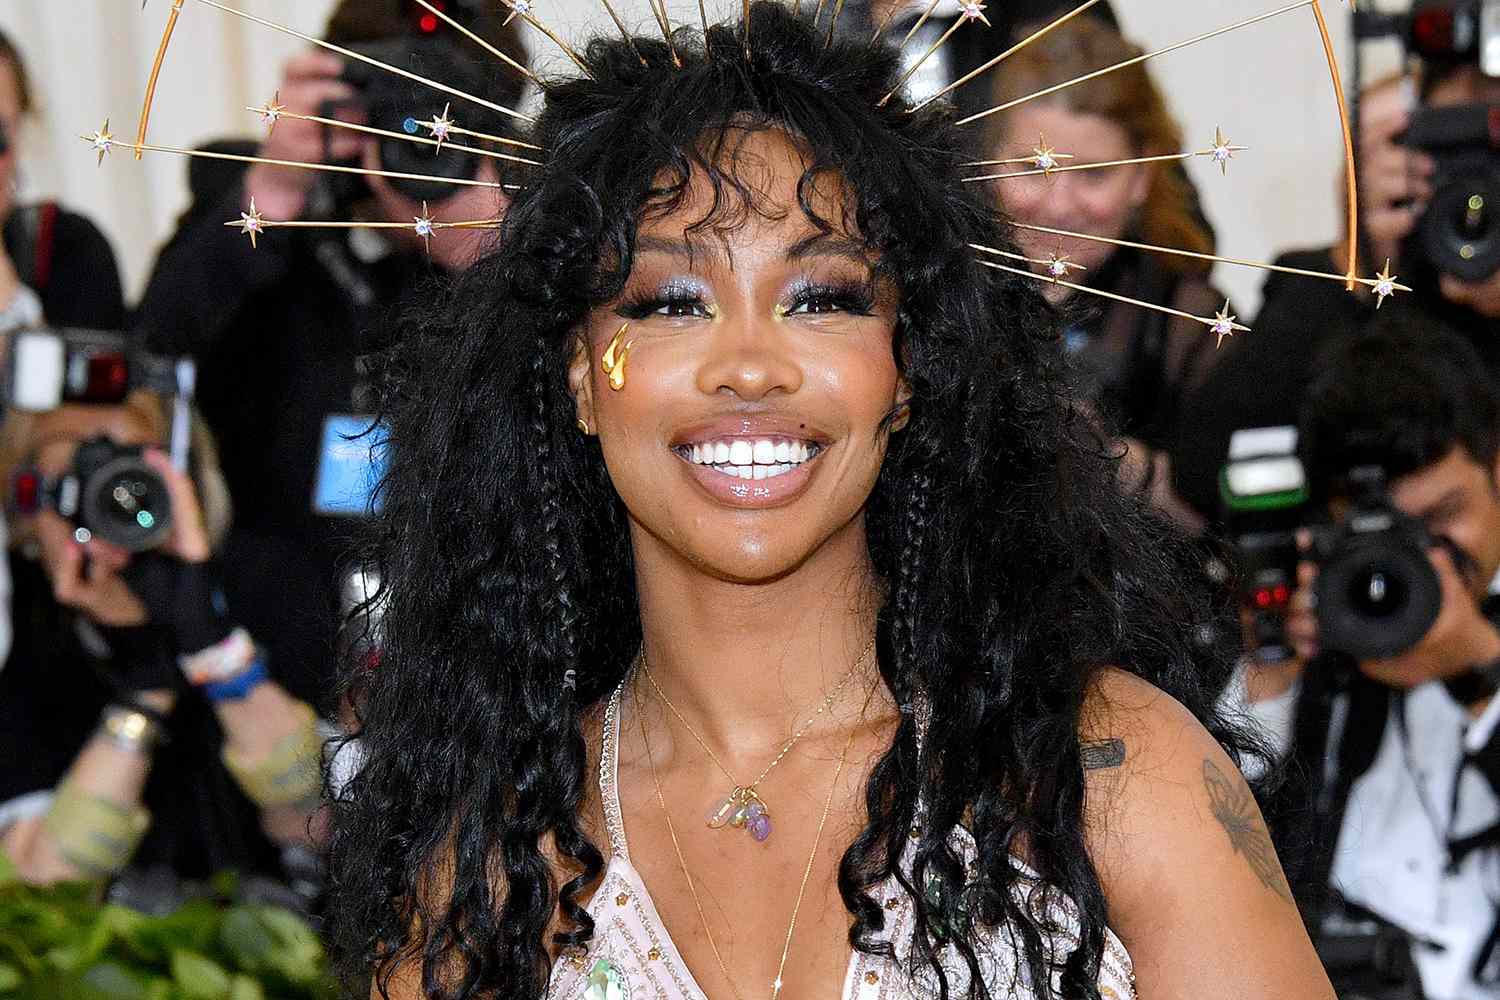 SZA Admitted That She ‘Punked Out’ Of Sending In Her ‘Calling My Phone’ Verse To Lil Tjay And 6LACK